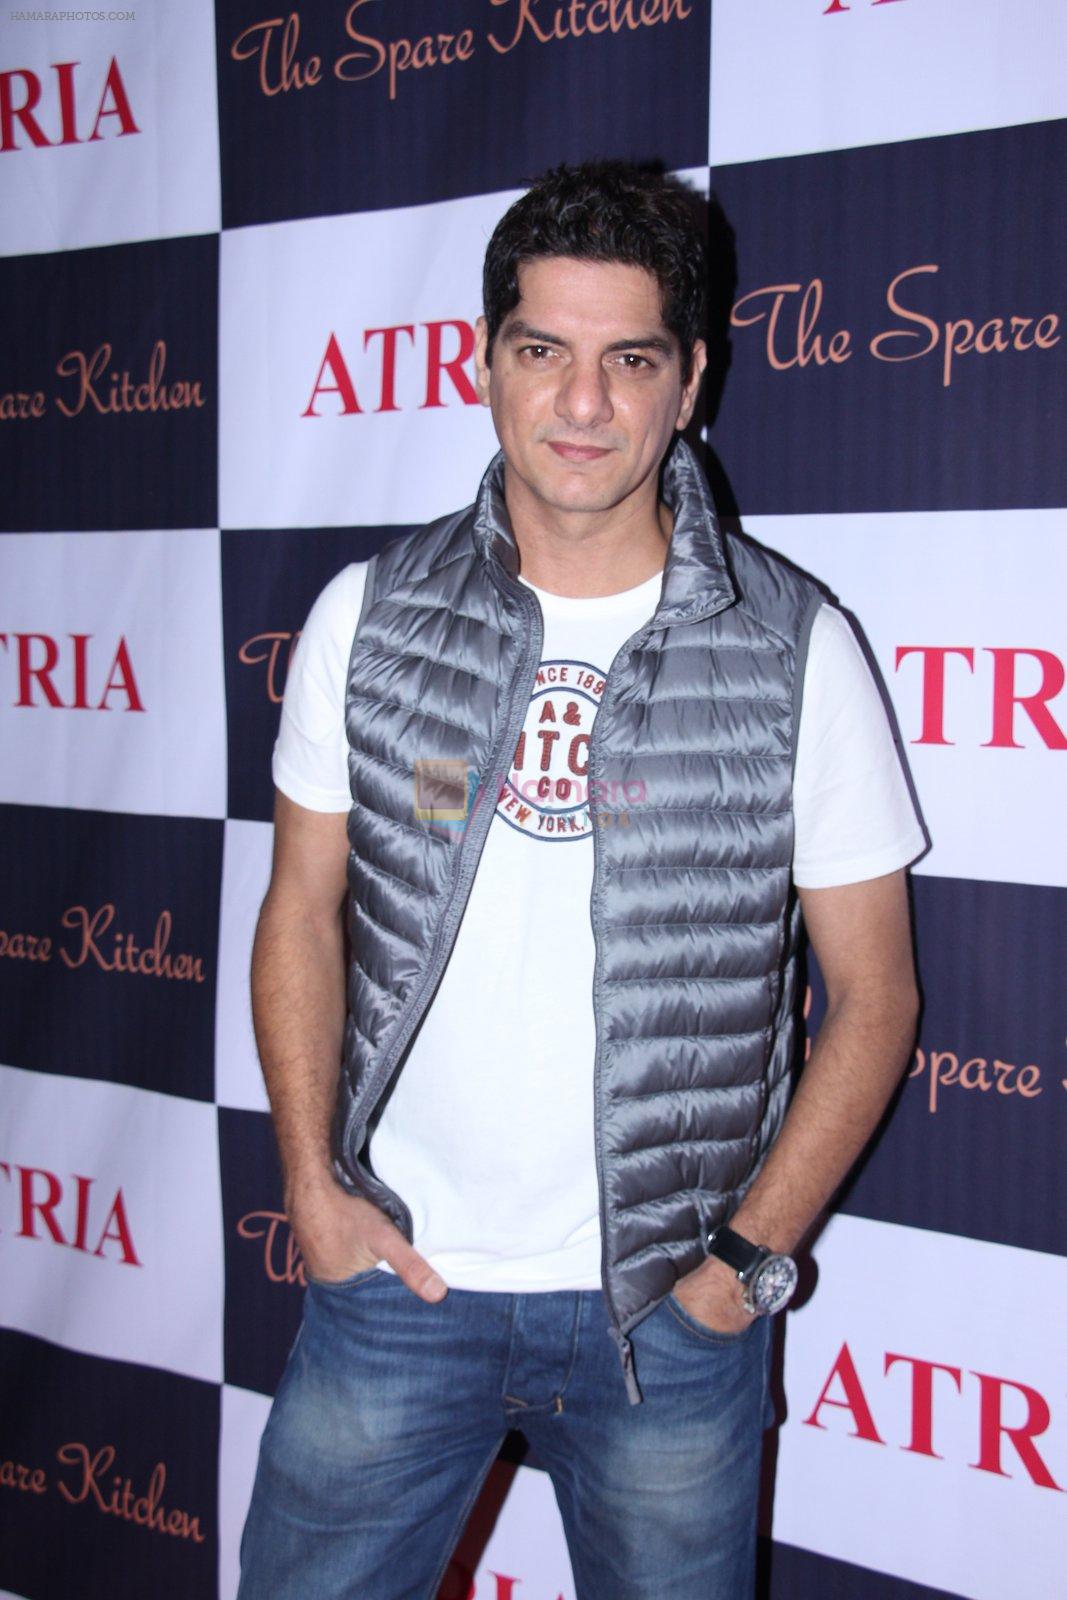 DJ Aqeel at Ritika and Kunal Vardhan's Spare Kitchen launch in Atria Mall on 25th nov 2016